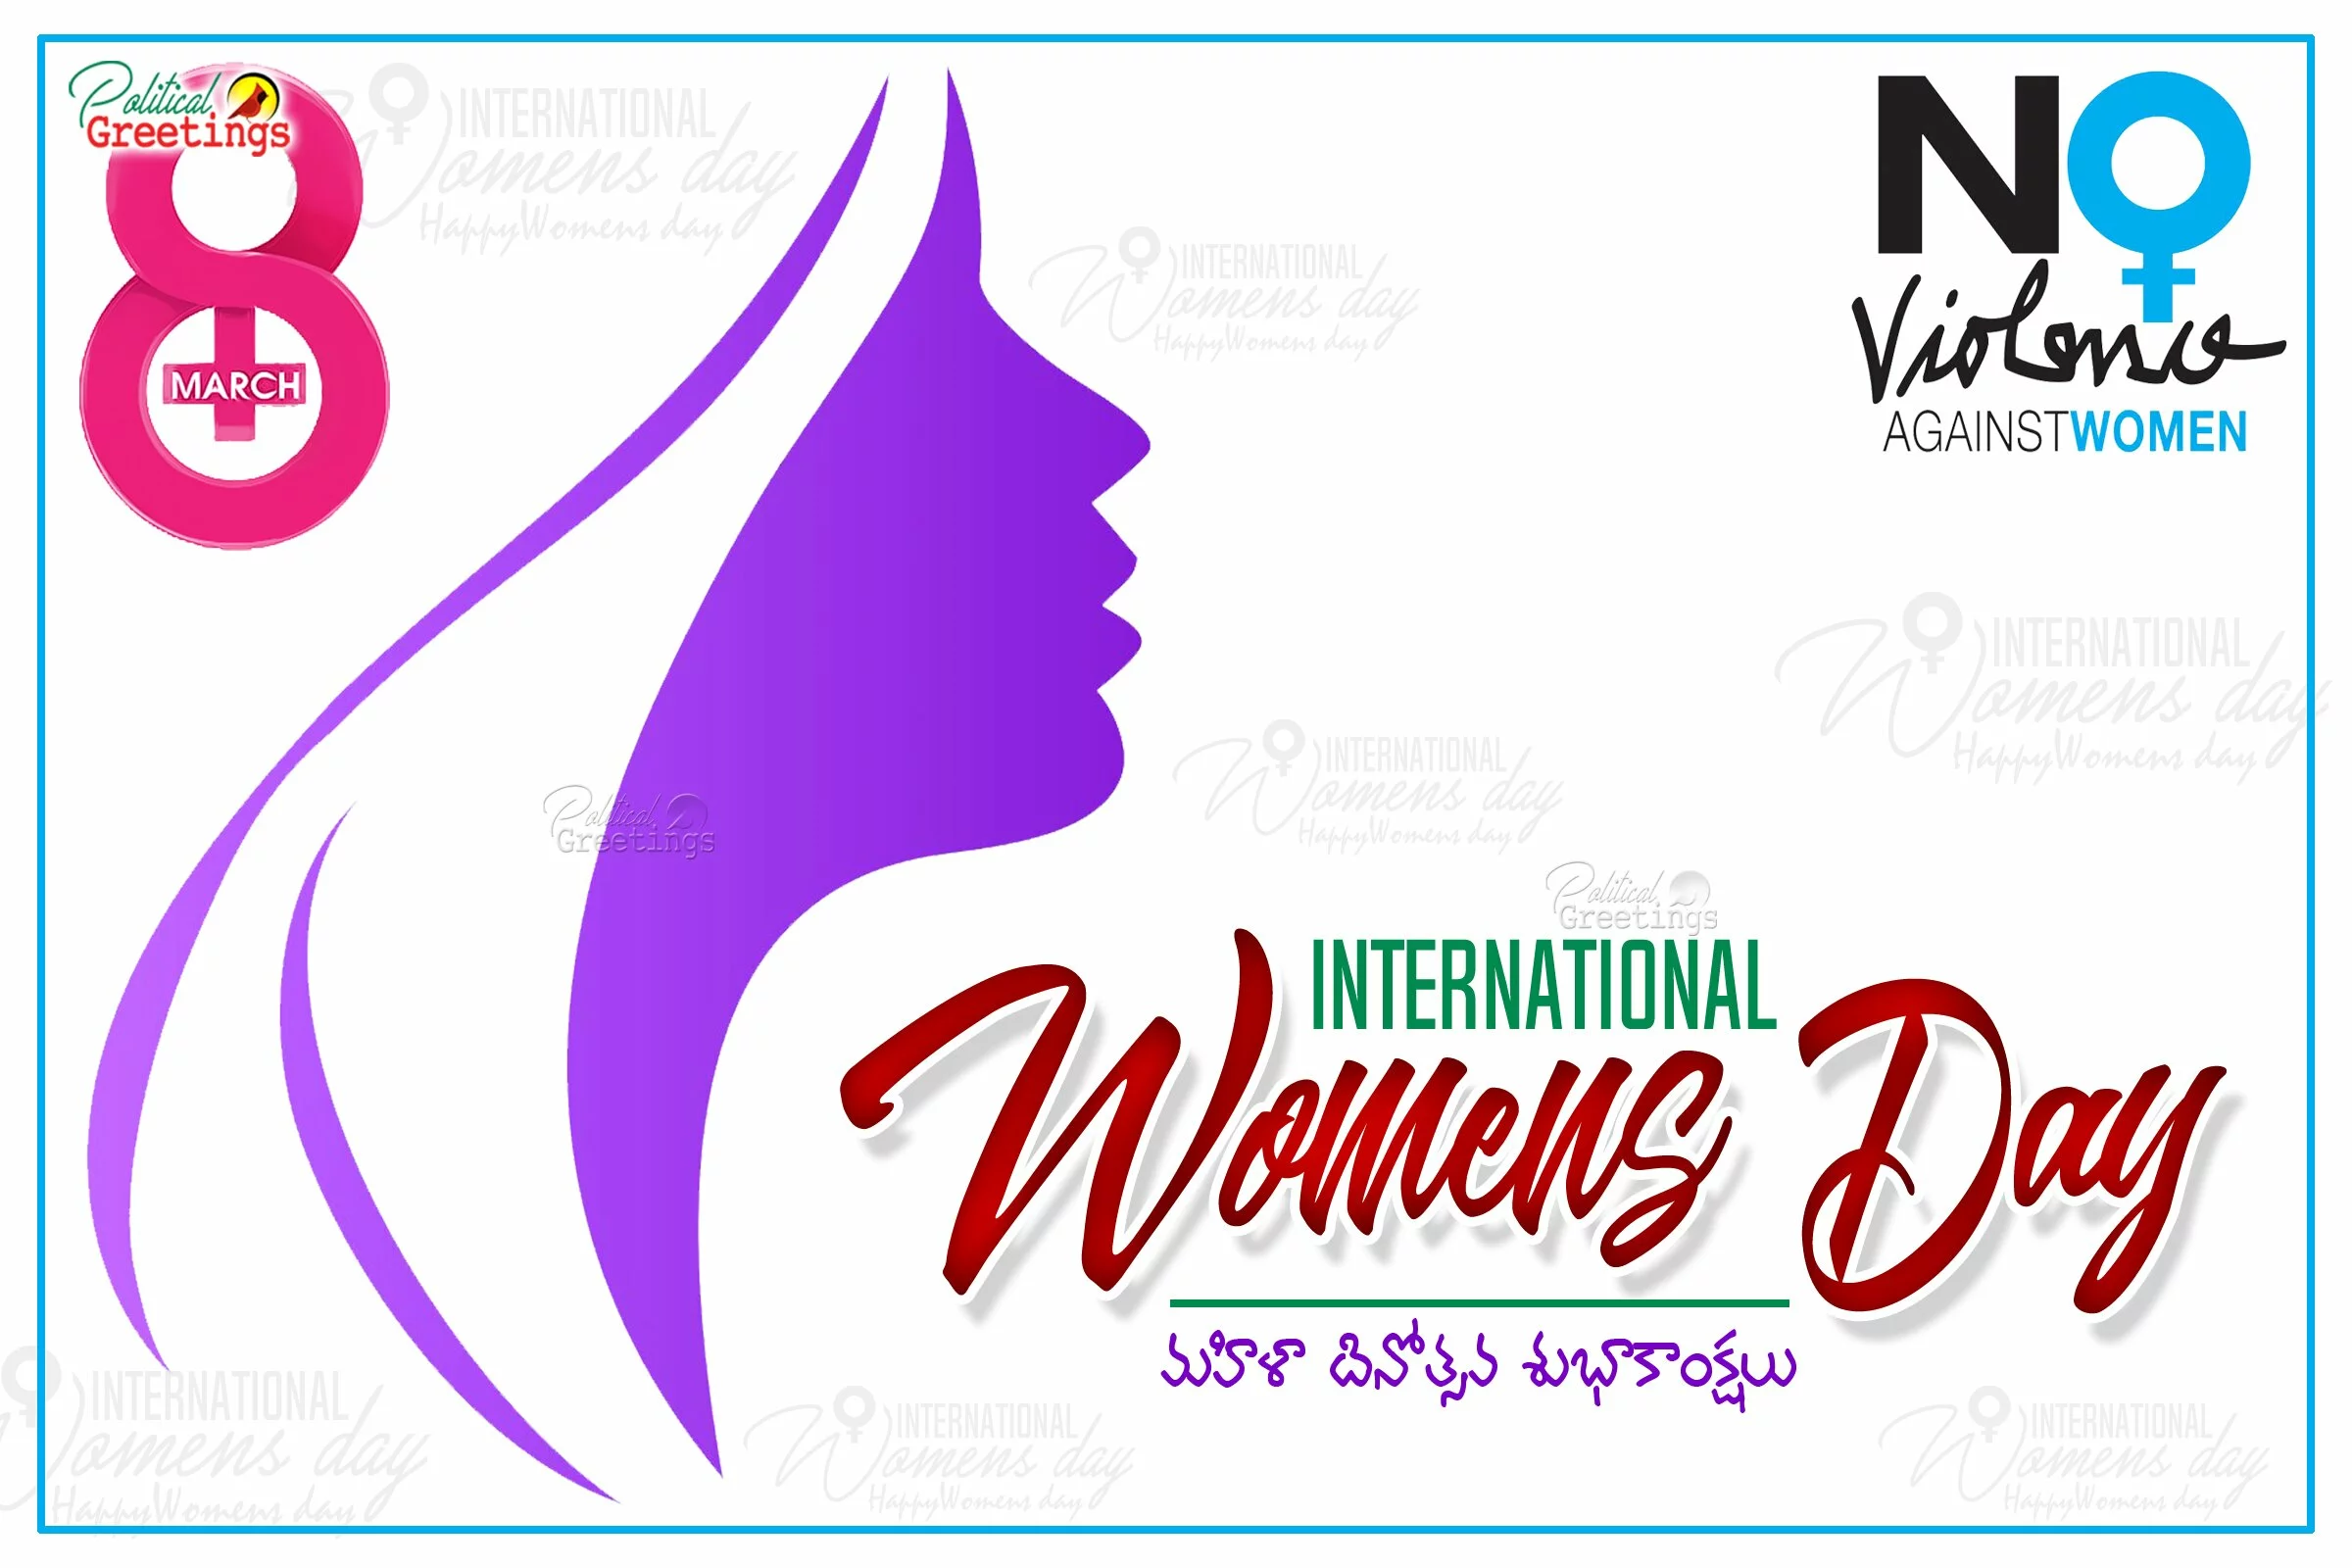 Happy Women's Day 2018 Telugu Quotes and greetings